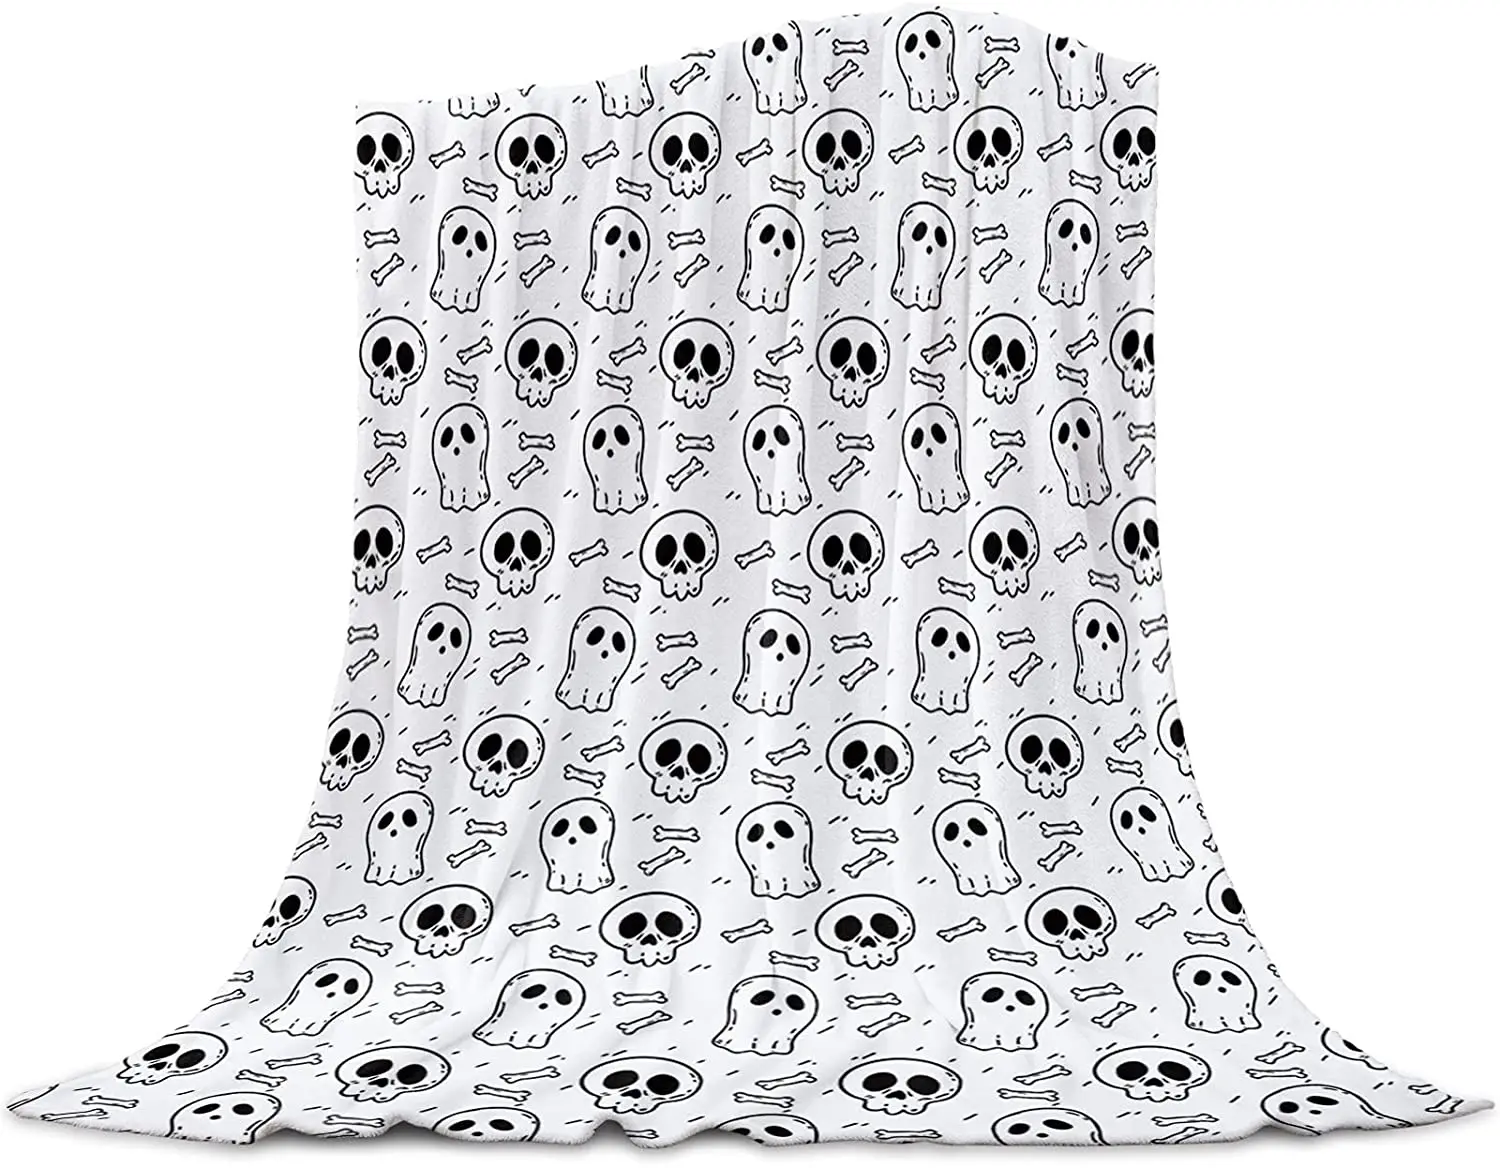 

Flannel Blankets and Throws for Couch Bed, Super Soft Cozy Lightweight Plush Throw Blanket,Halloween Ghost and Skull Theme